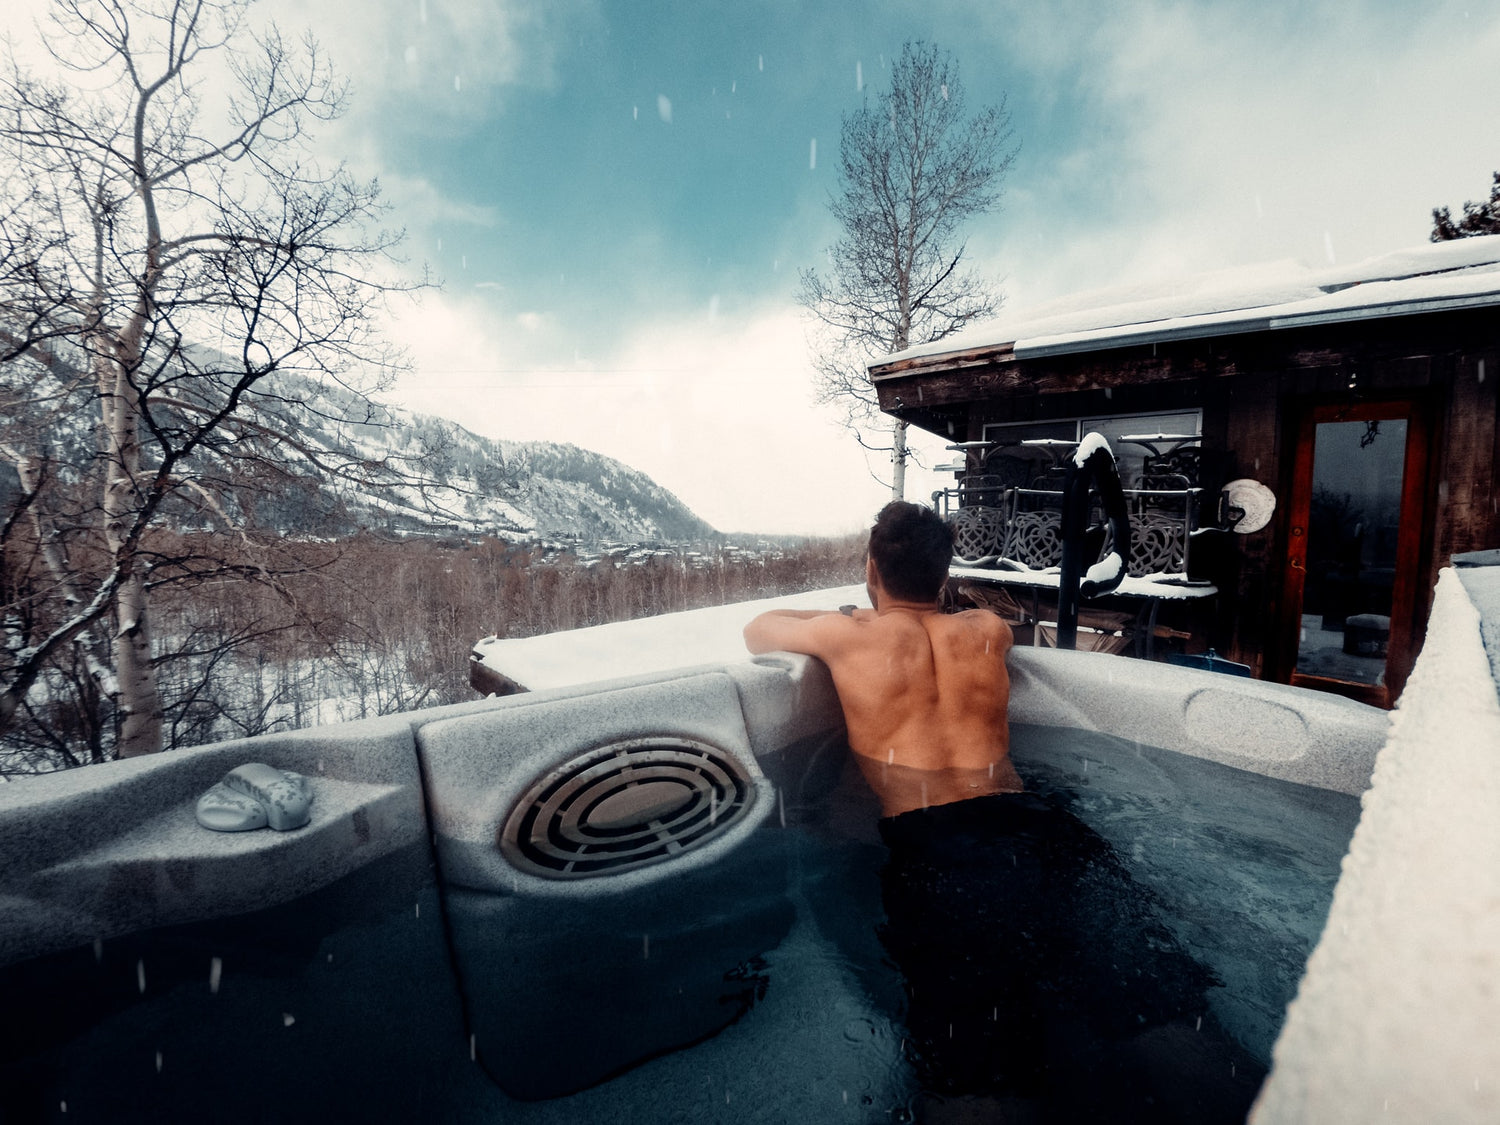 Man looking into Mountains from Hot Tub